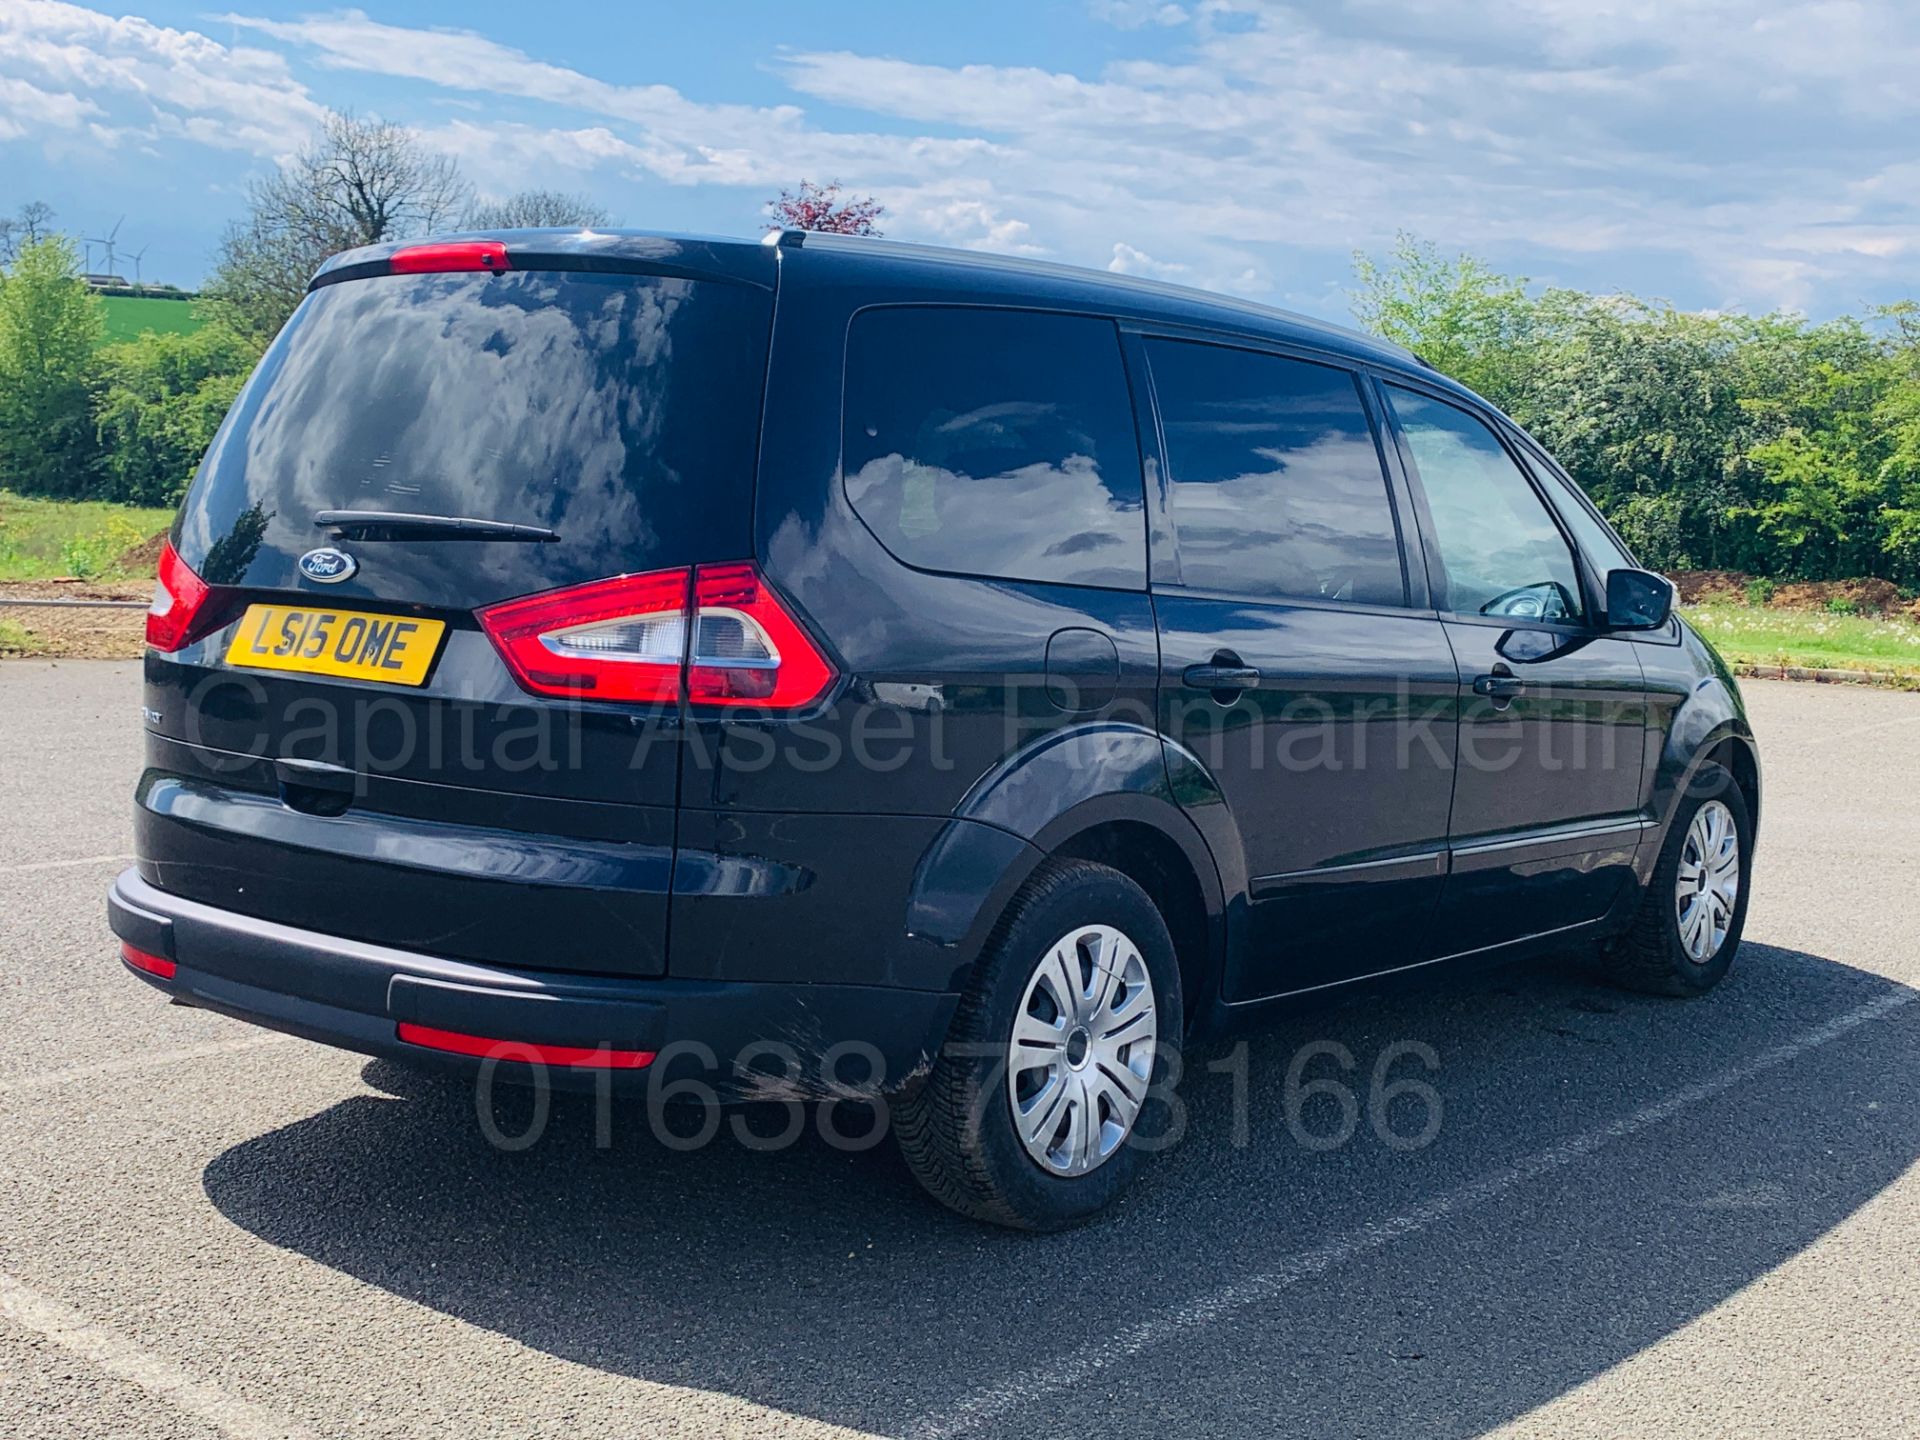 (On Sale) FORD GALAXY *ZETEC* 7 SEATER MPV (2015) '2.0 TDCI - 140 BHP - POWER SHIFT' (1 OWNER) - Image 8 of 37